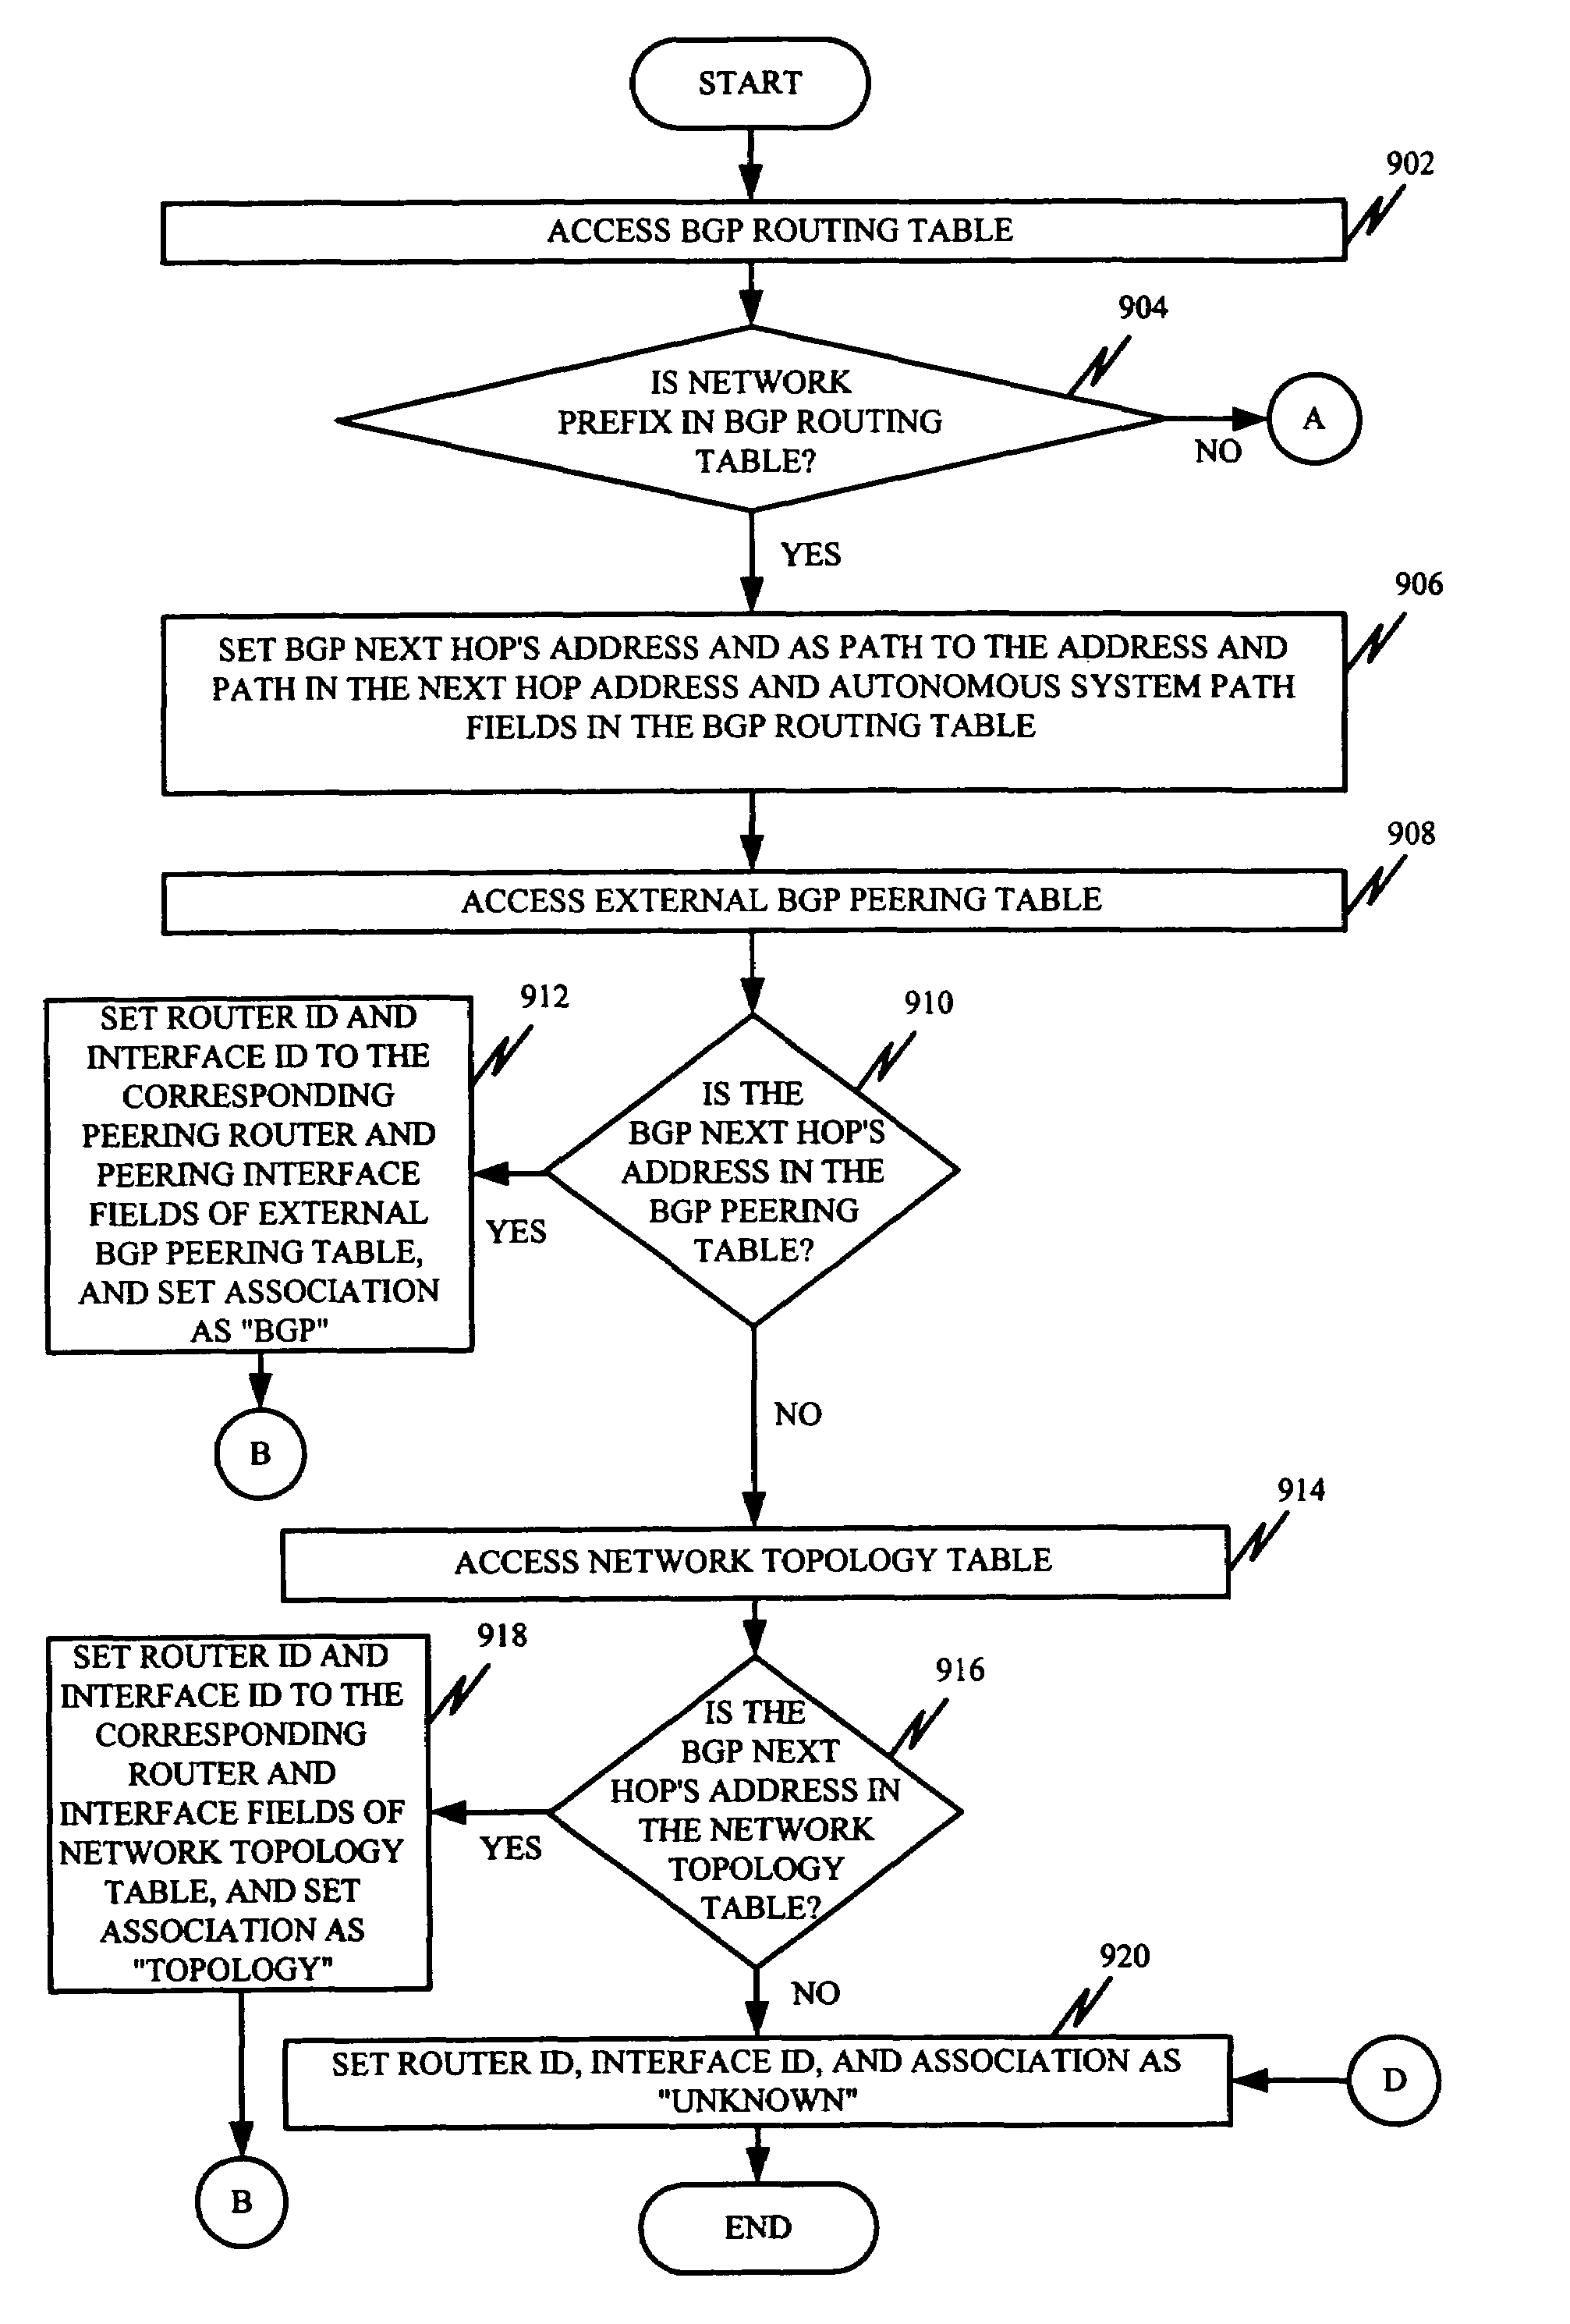 System and method for improving traffic analysis and network modeling